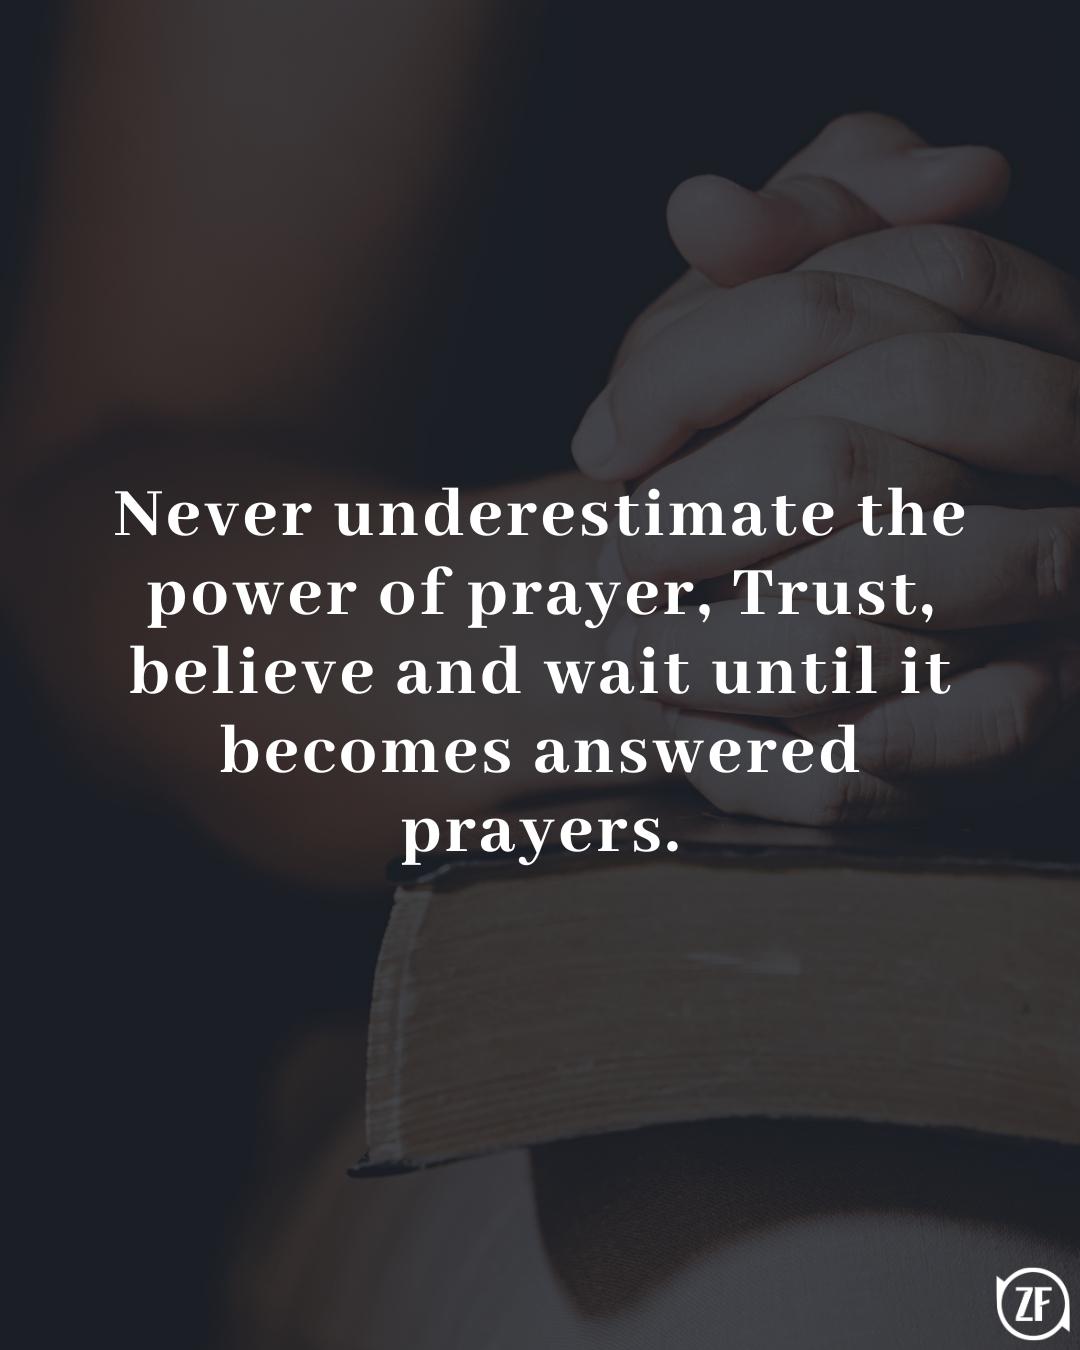 Never underestimate the power of prayer, Trust, believe and wait until it becomes answered prayers.